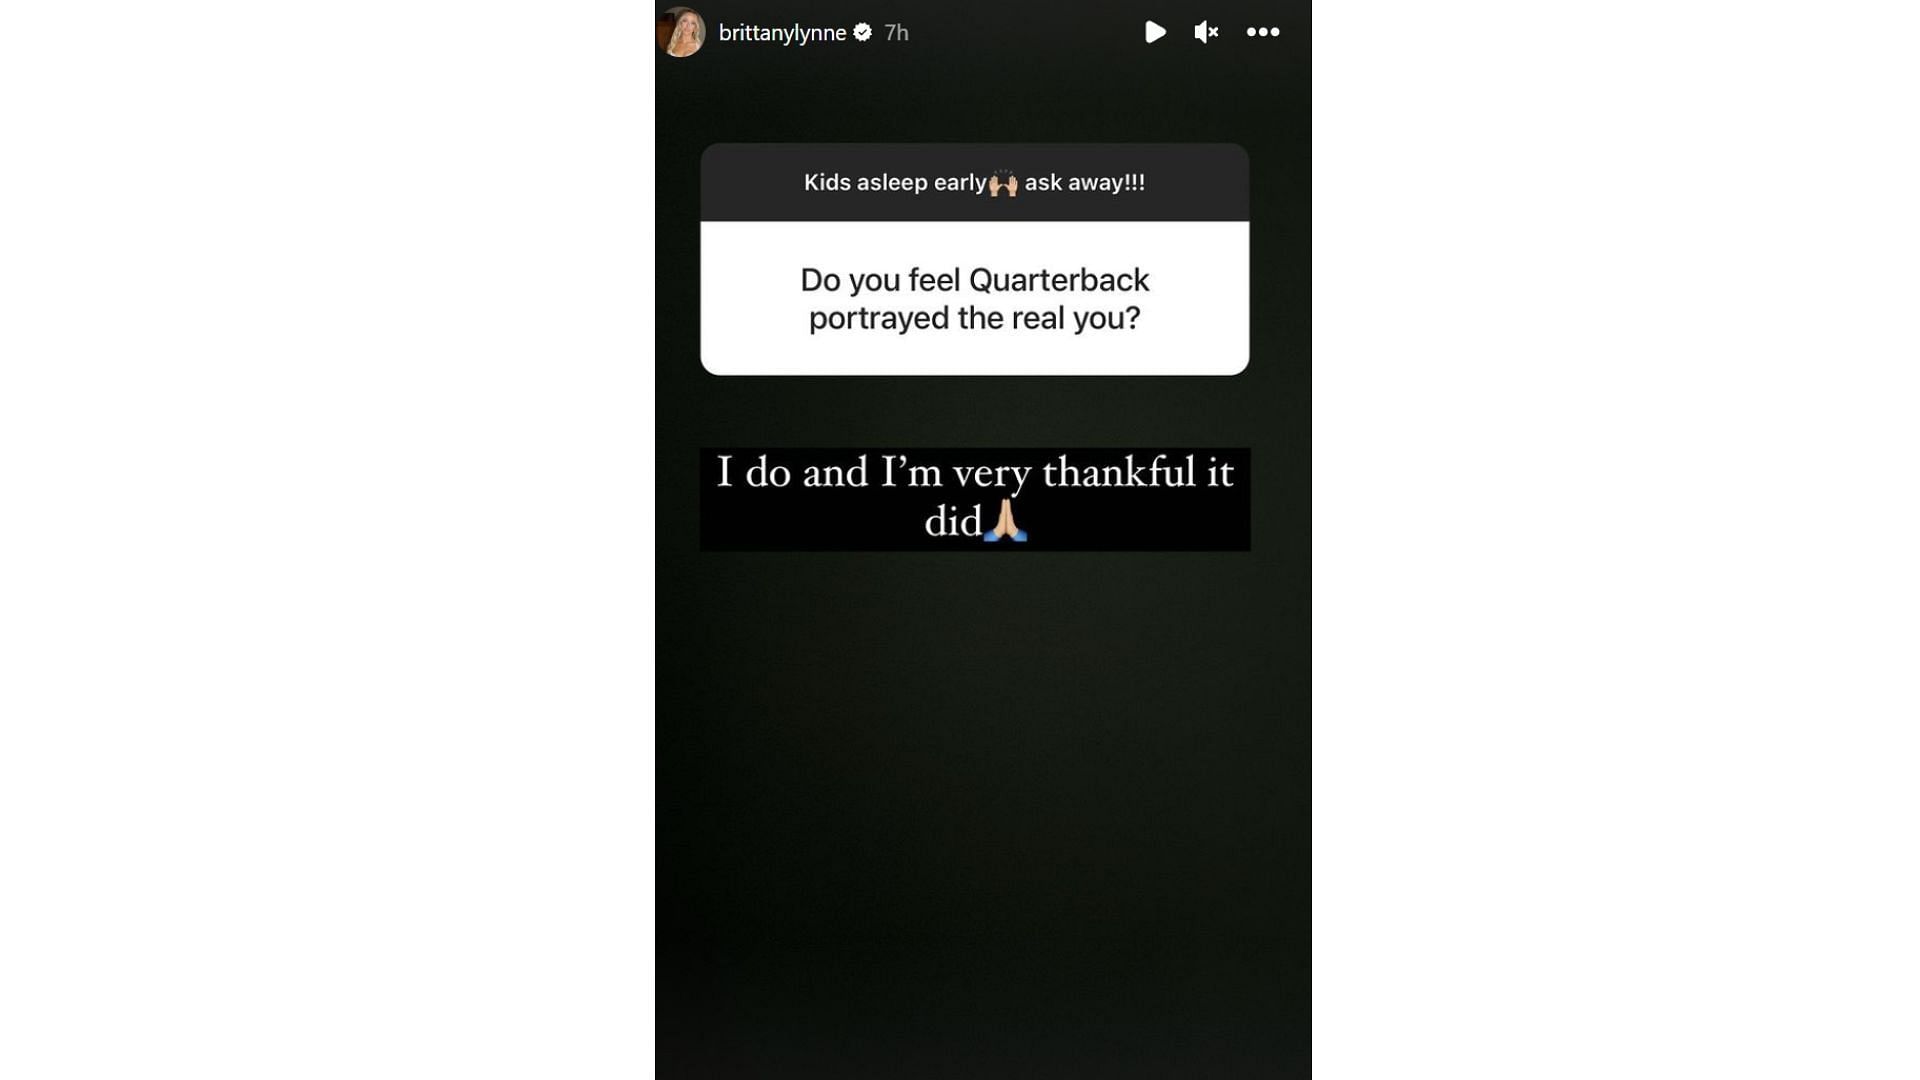 Image Credit: Brittany Mahomes&rsquo; Instagram Story